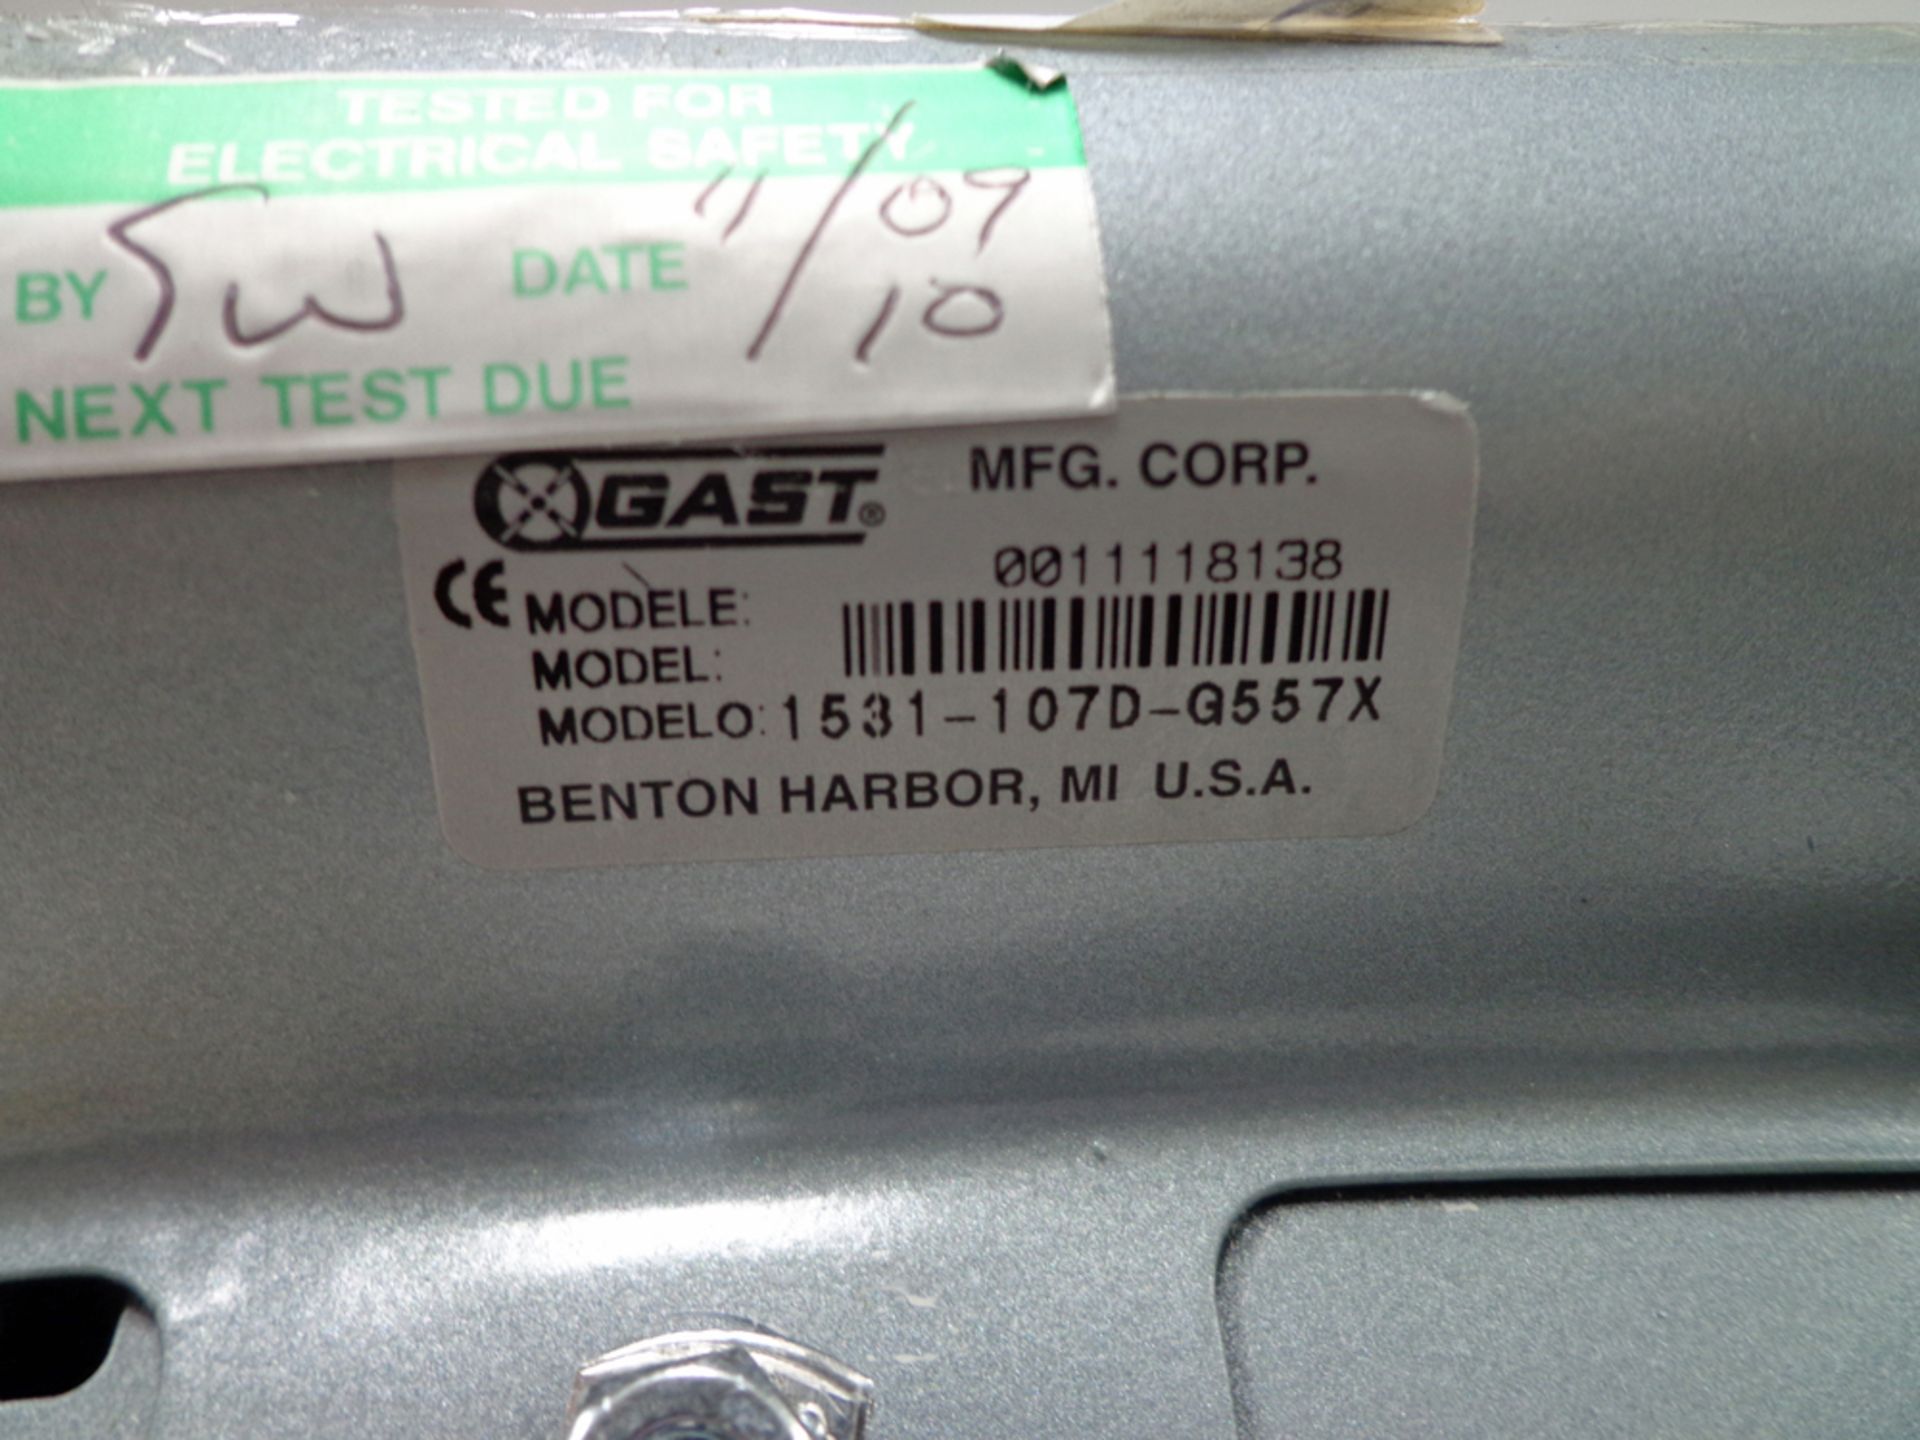 Gast Pumps, Series 1531, for dental and laboratory applications, S/Ns 59075 & 59027. - Image 3 of 3